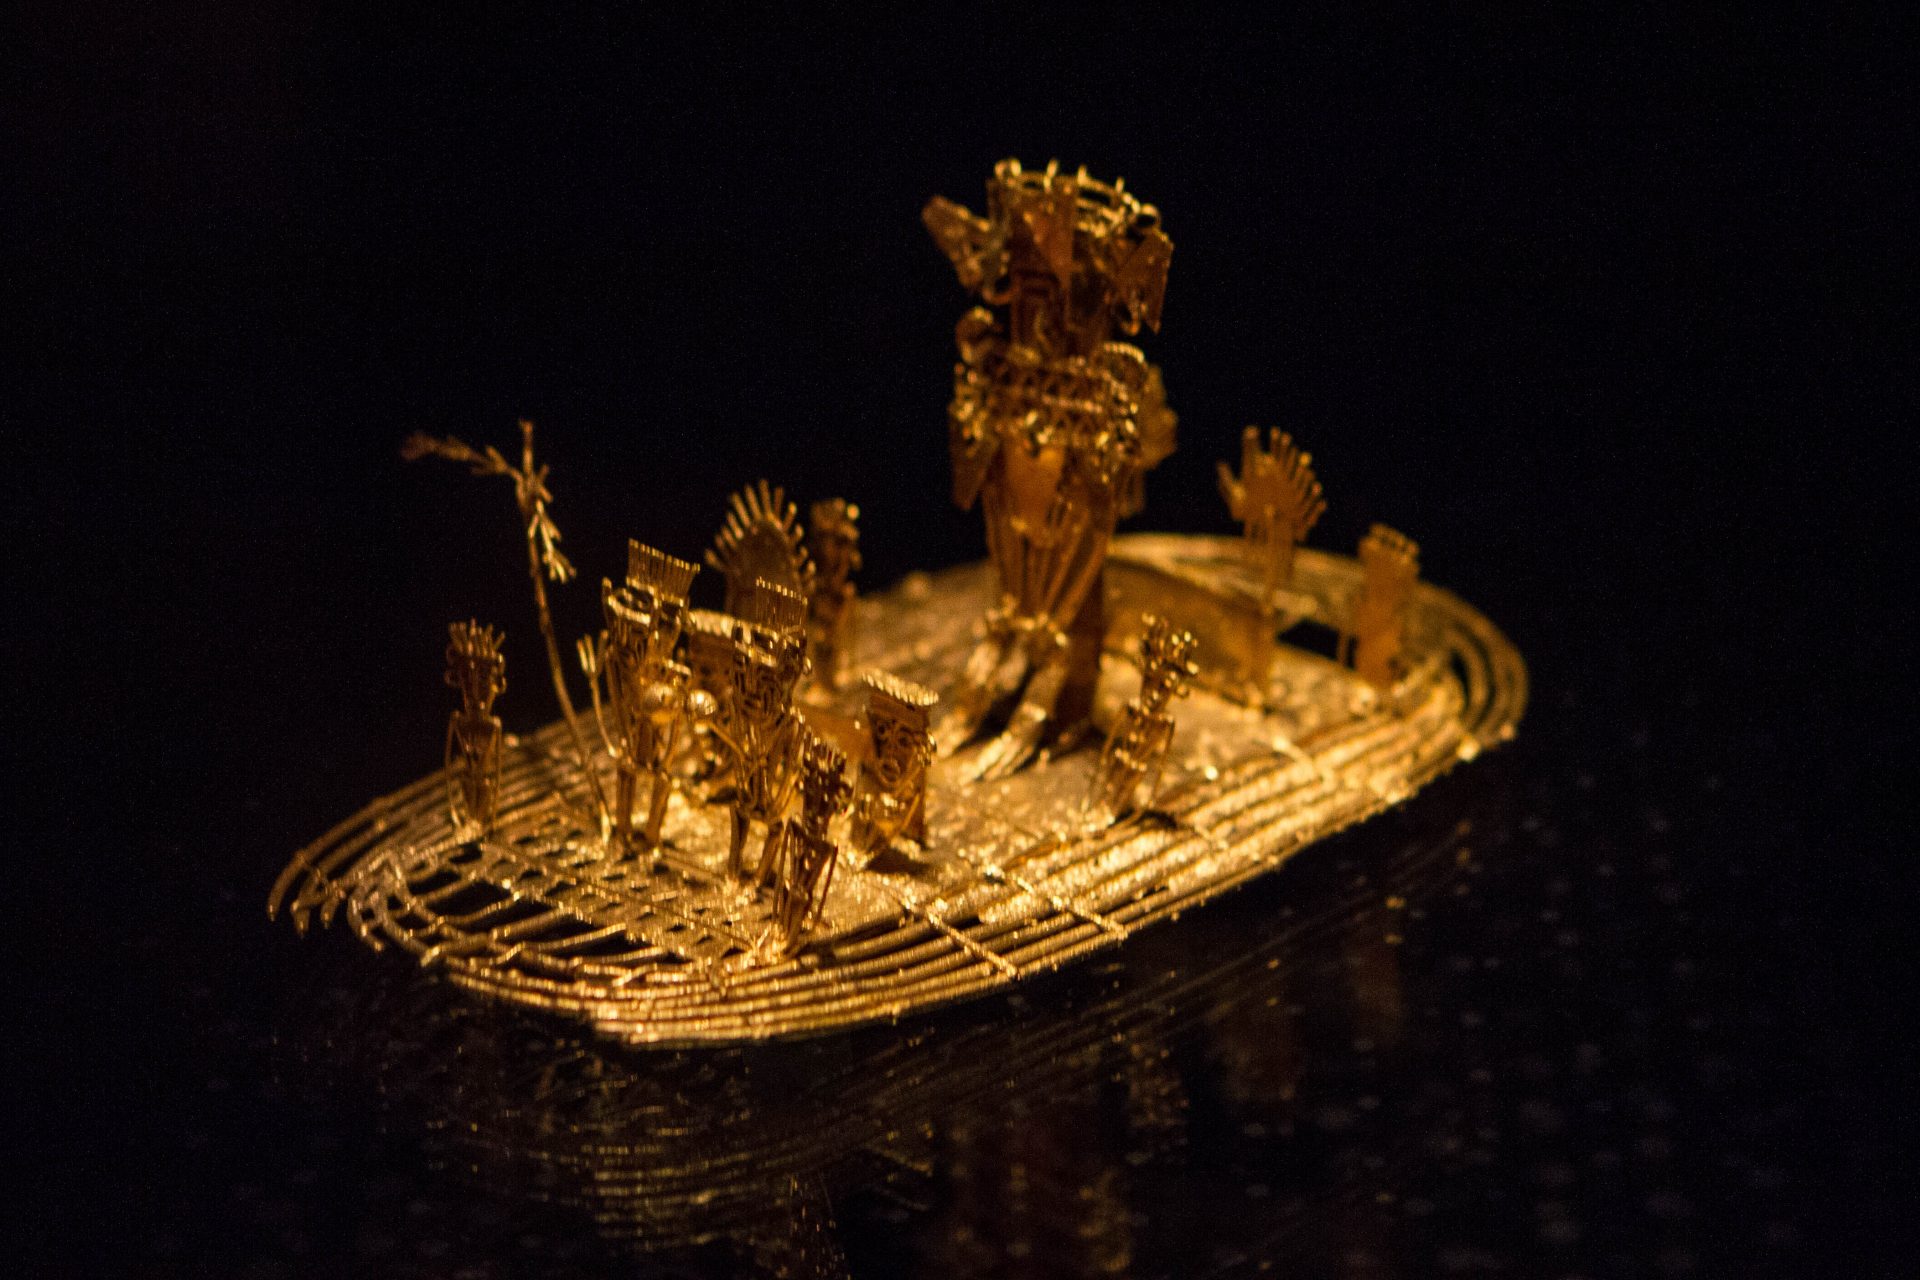 An intricate piece made of solid gold on display at the Gold Museum in Bogota Colombia.